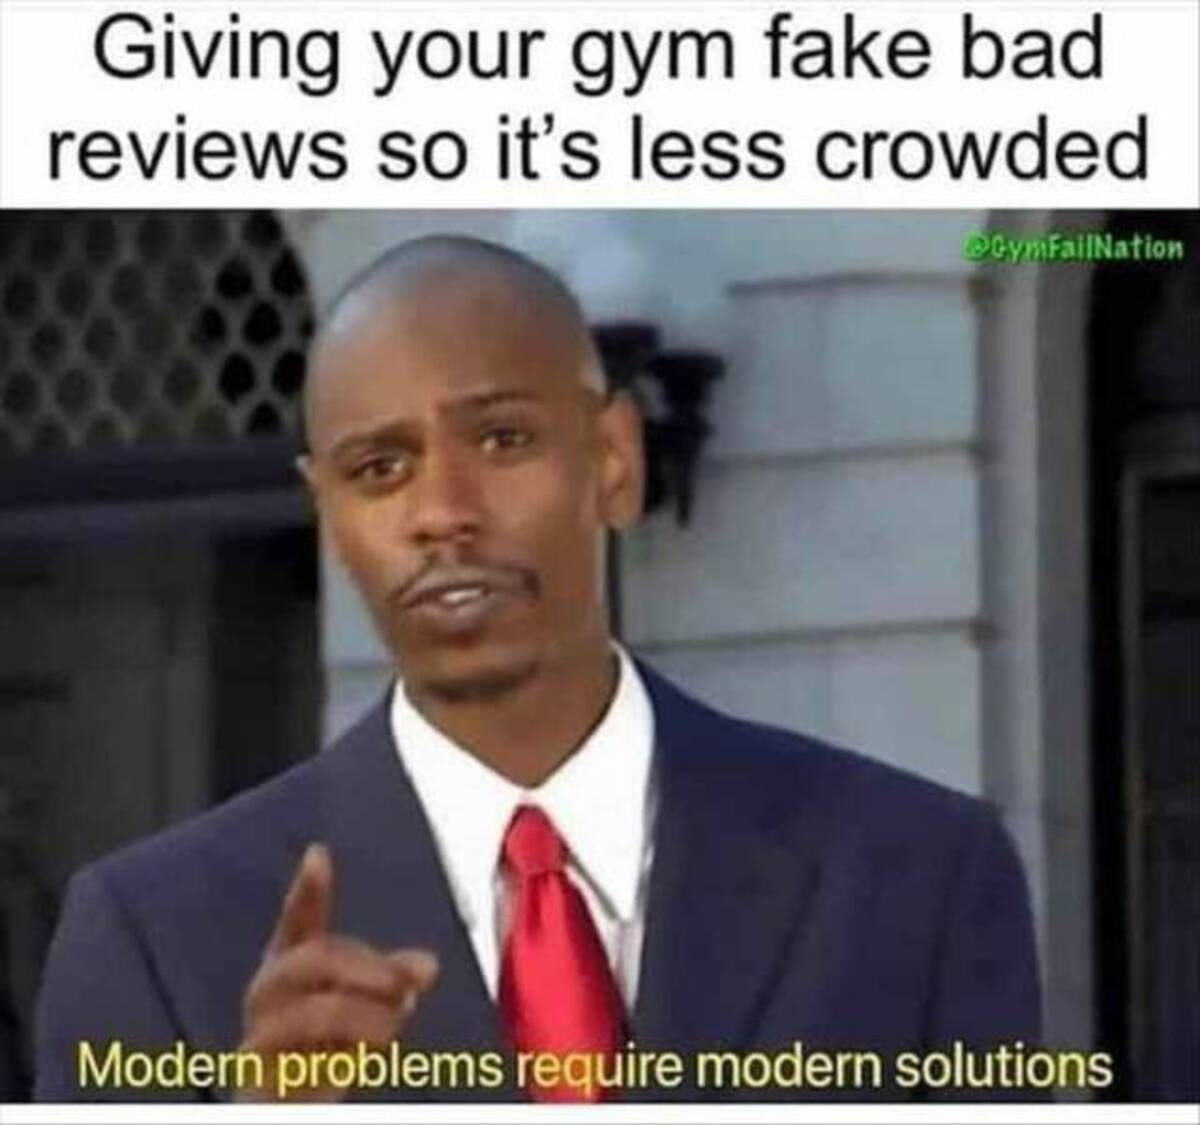 photo caption - Giving your gym fake bad reviews so it's less crowded Modern problems require modern solutions